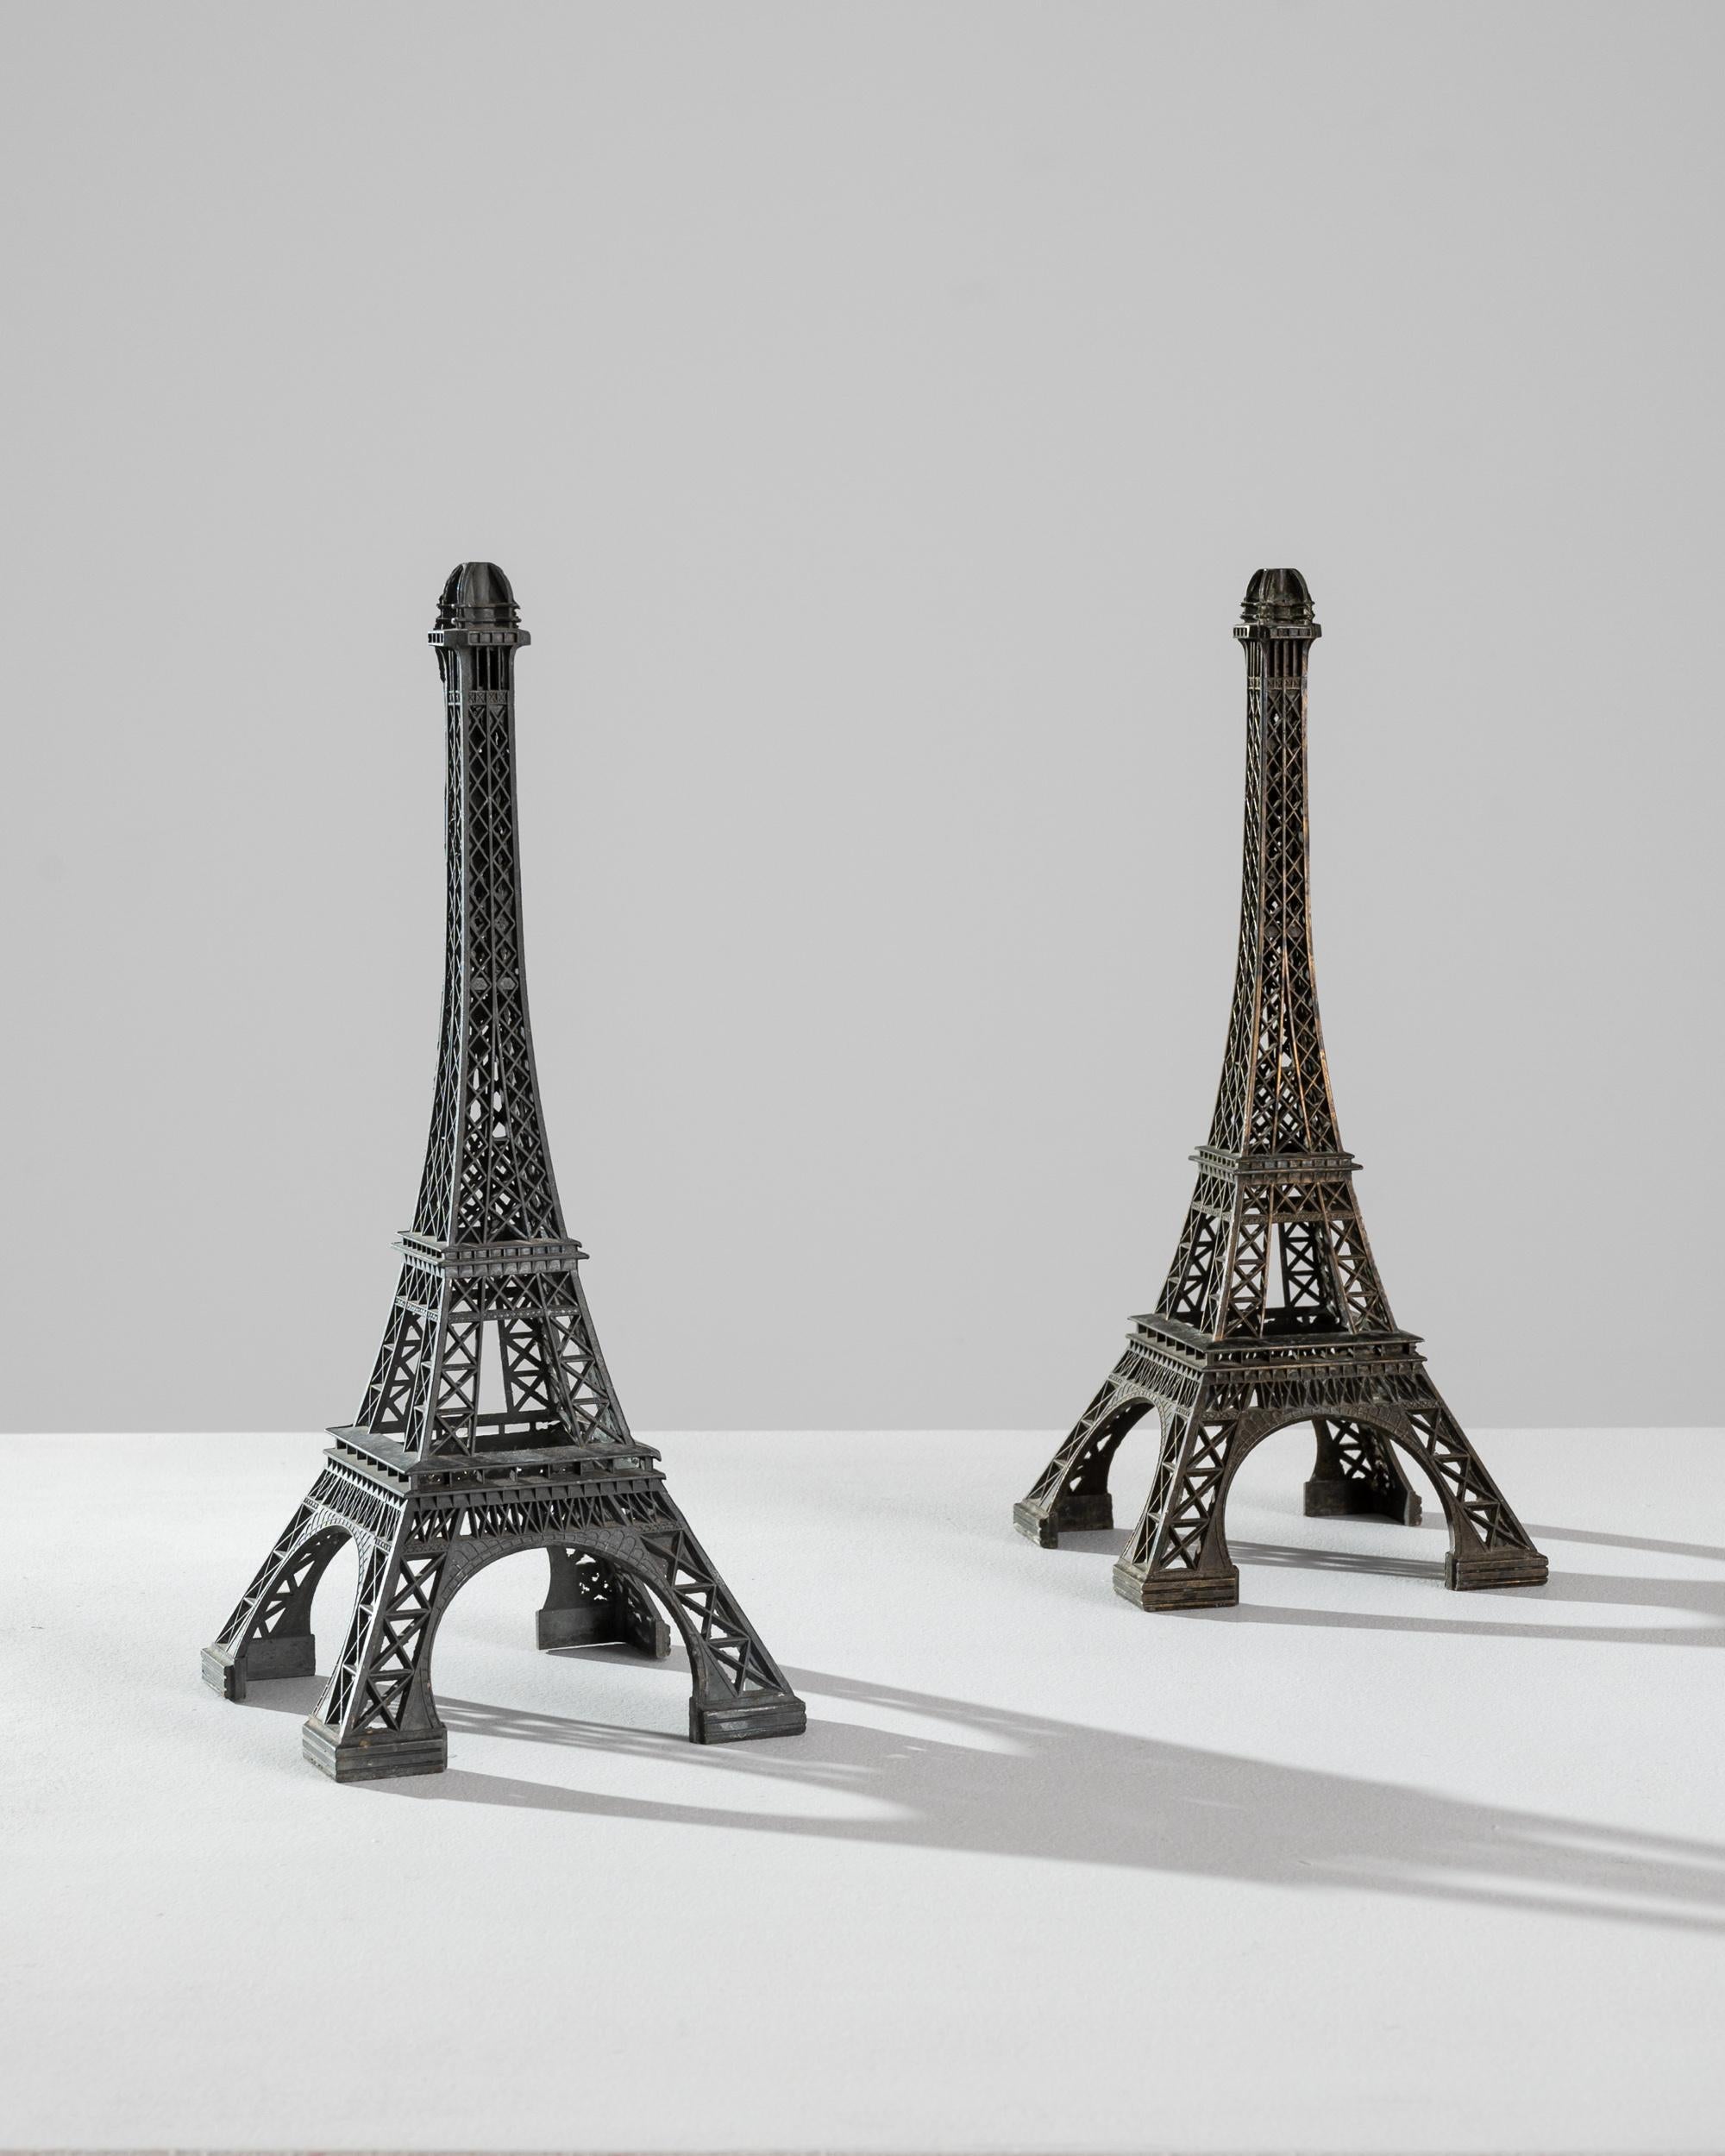 This pair of brass decorations in the shape of the Eiffel tower conjures the romance of a voyage to Paris. Made in France in the 20th Century, the intricate lattice-work is rendered in perfect detail, bringing the iconic monument to life. The dark